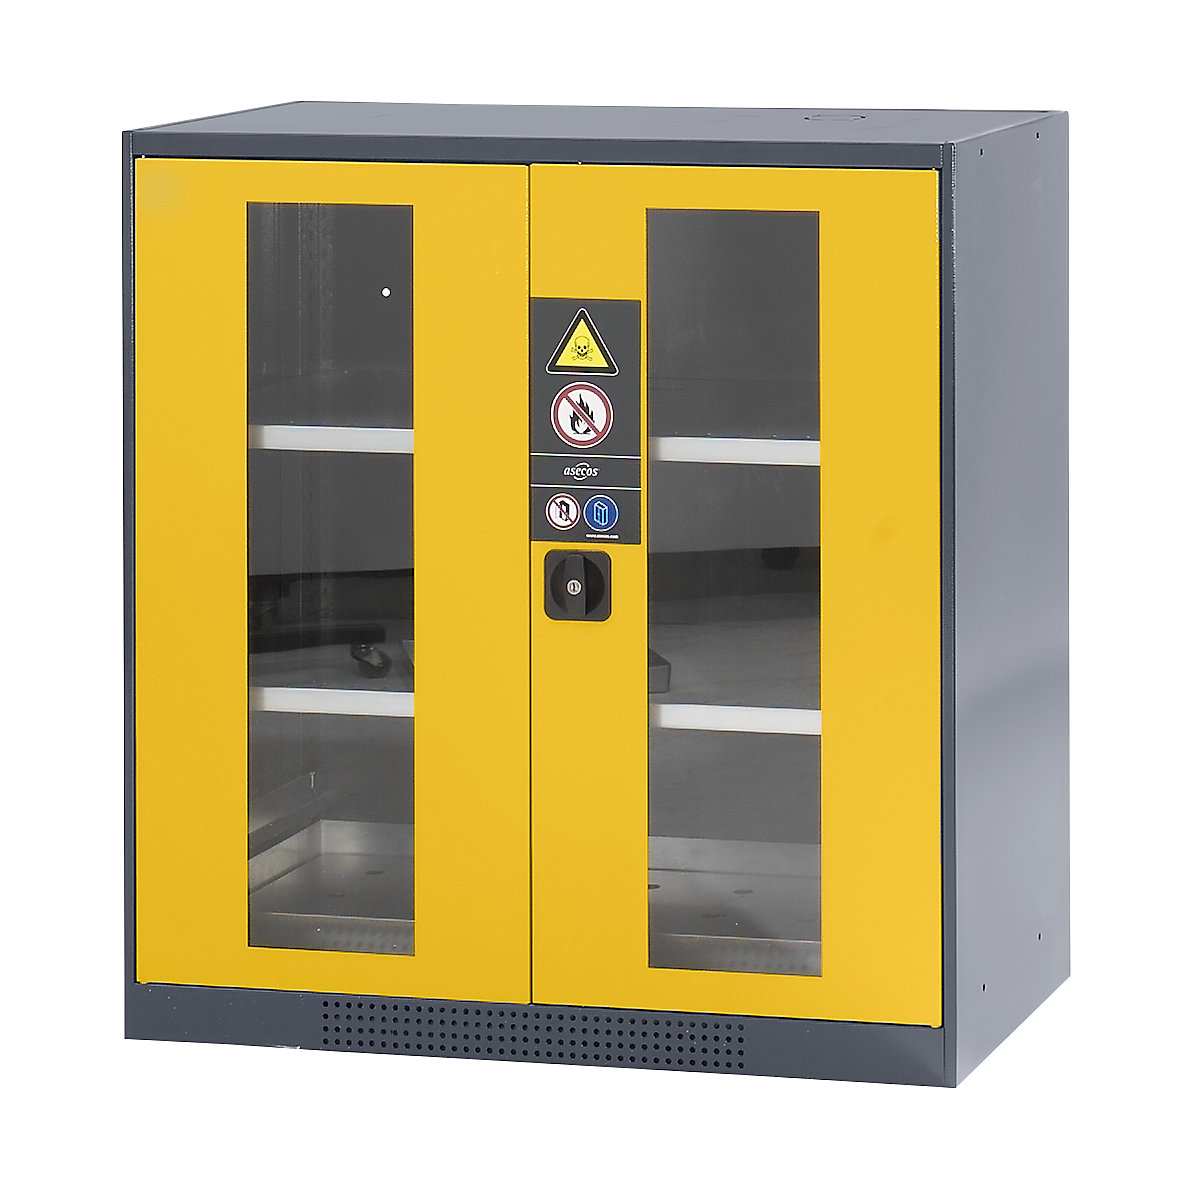 Laboratory chemical storage cupboard – asecos, 2 door, half height, 2 shelves, with vision panel, yellow-3